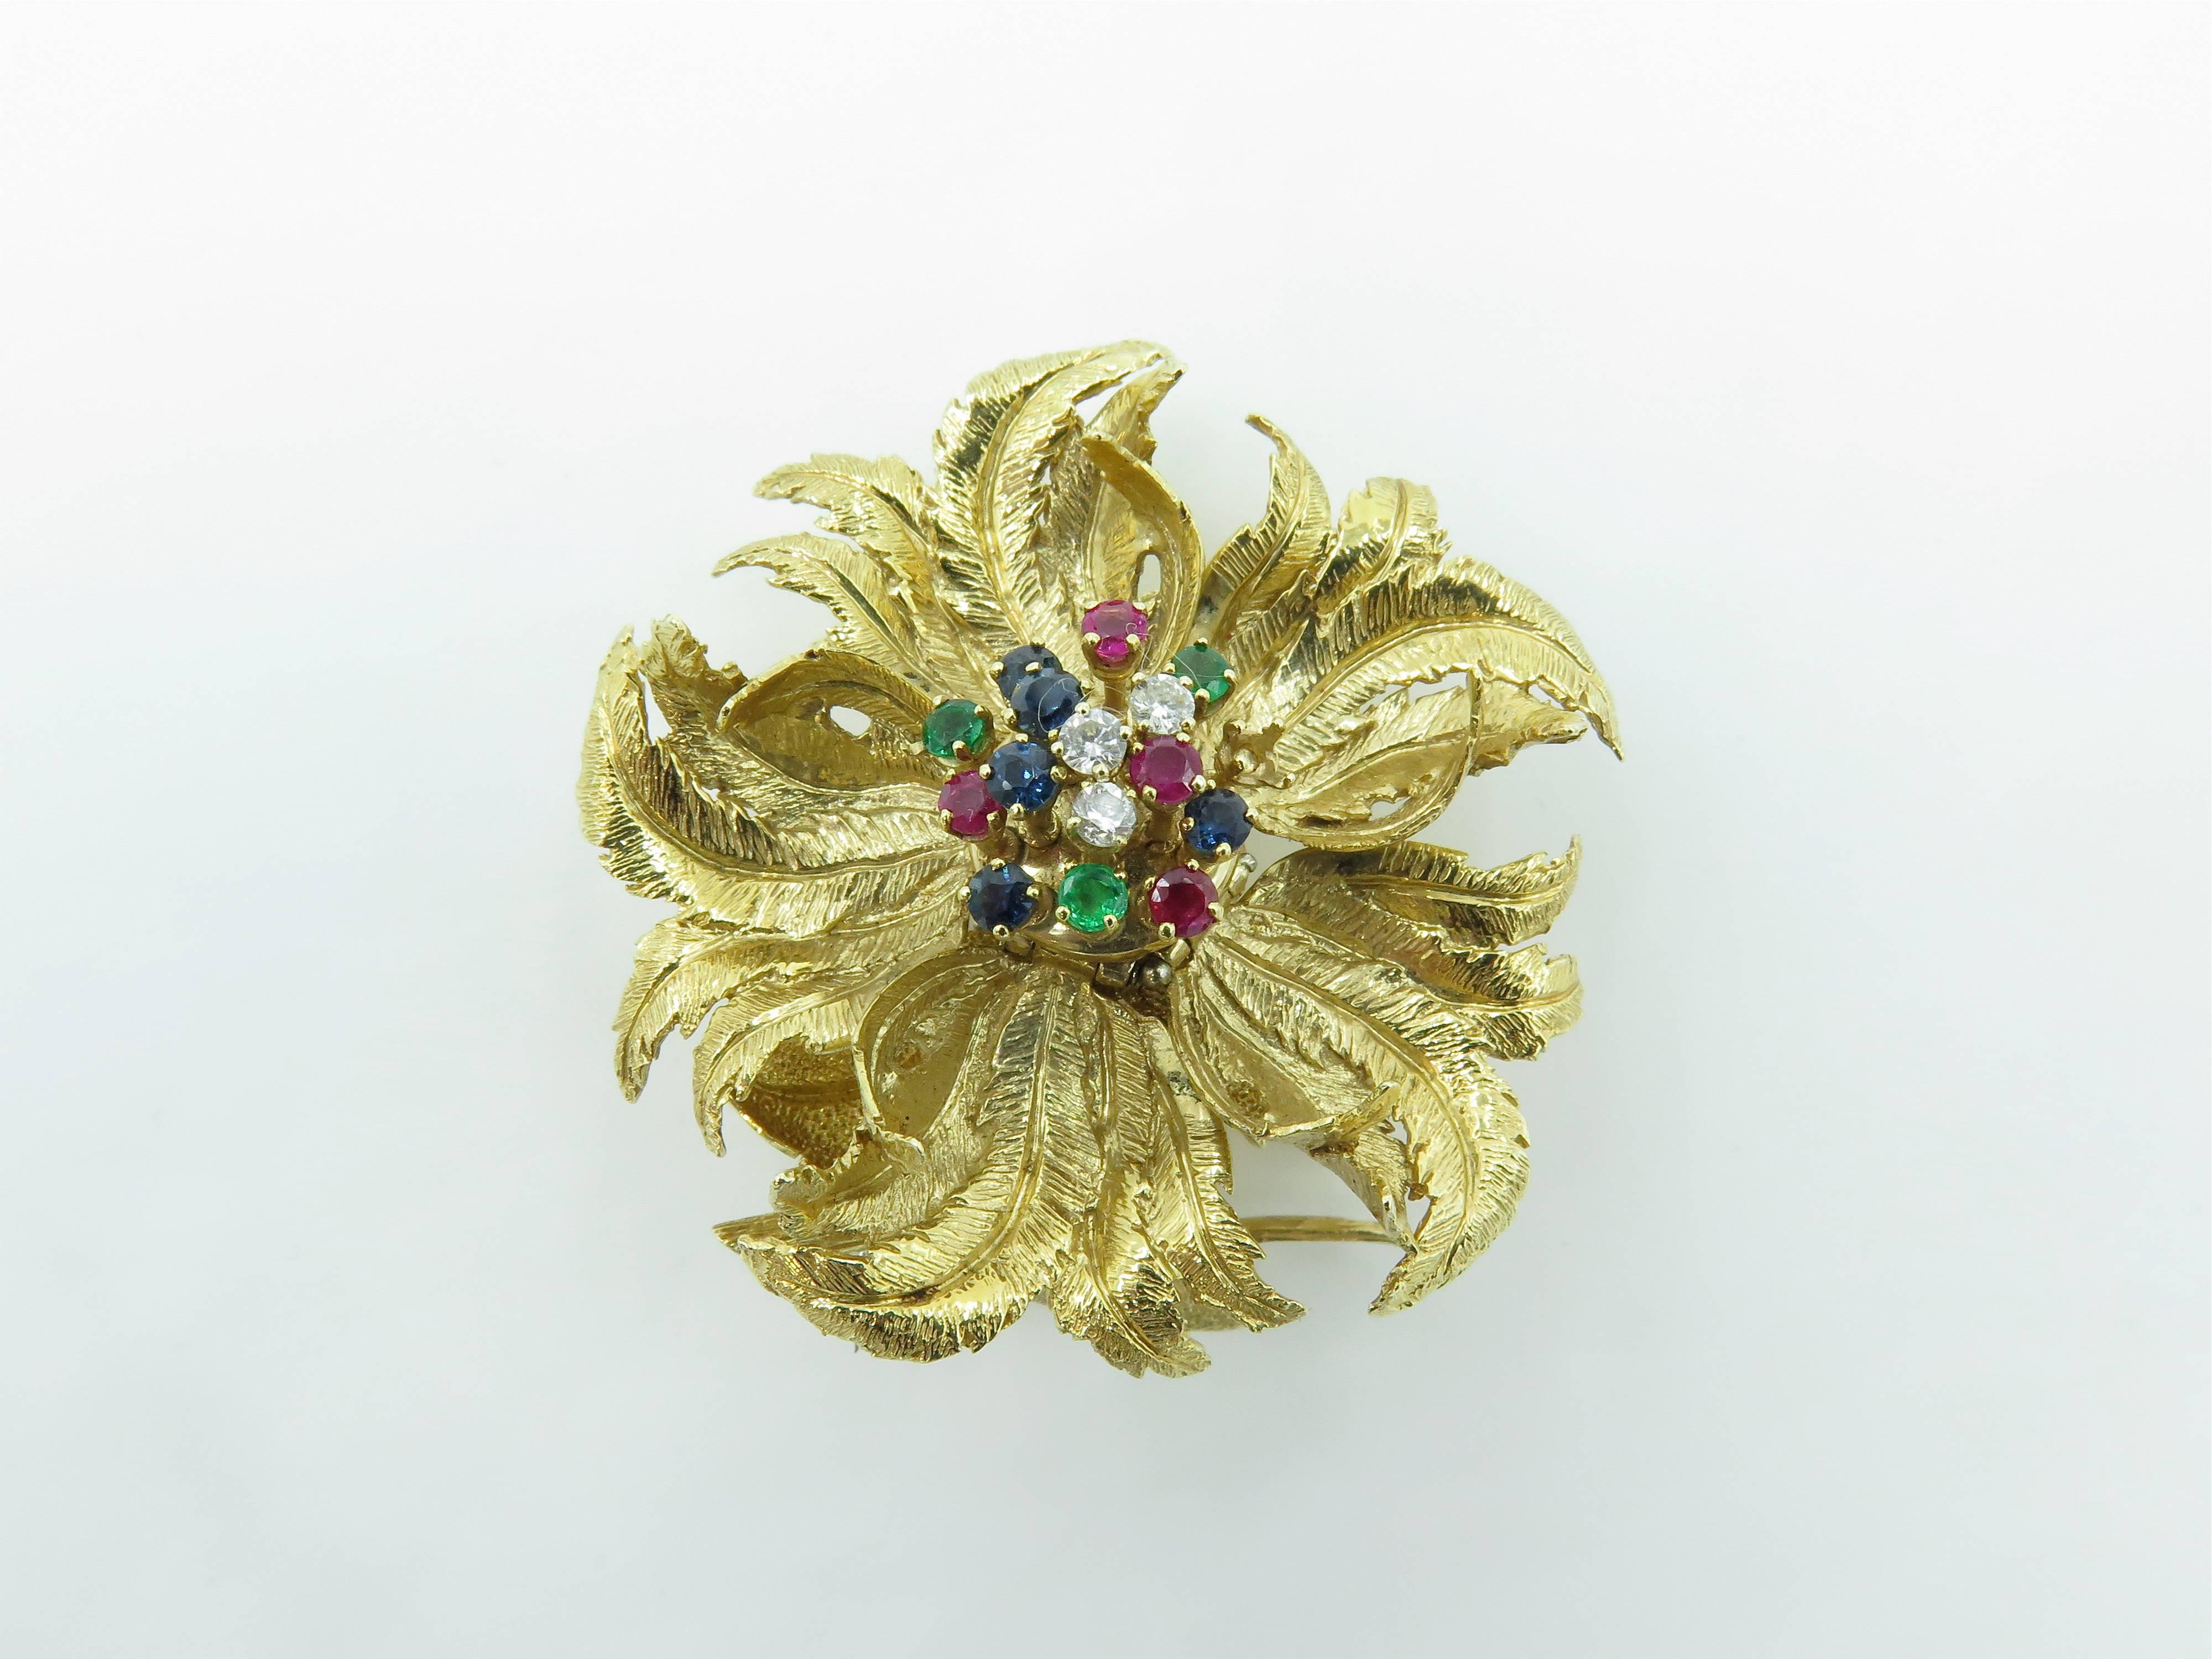 A 14 karat yellow gold, gem set and diamond brooch. Designed as an textured gold flower, with articulated petals, centering a cluster of circular cut diamonds, rubies, emeralds and sapphires. Length is approximately 1 3/4 inches. Gross weight is